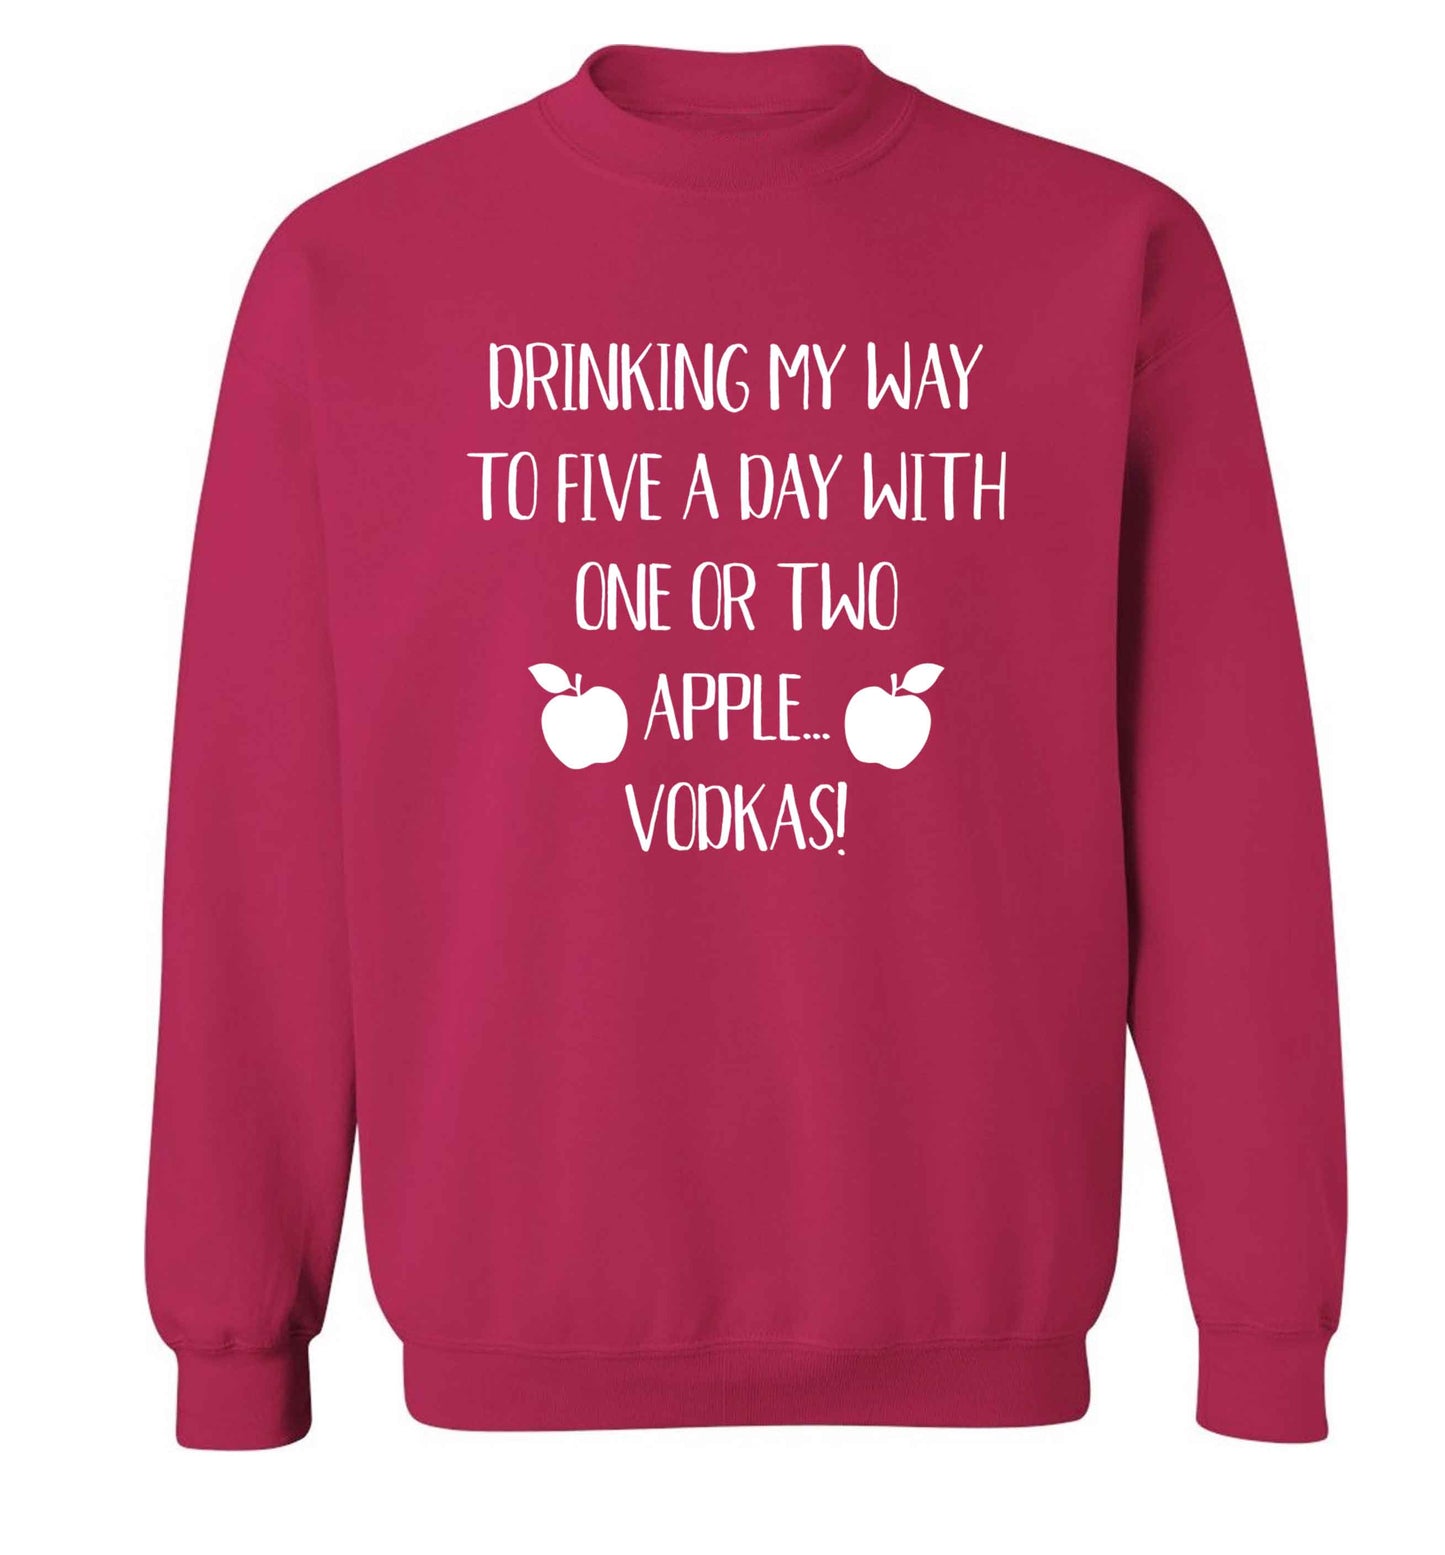 Drinking my way to five a day with one or two apple vodkas Adult's unisex pink Sweater 2XL